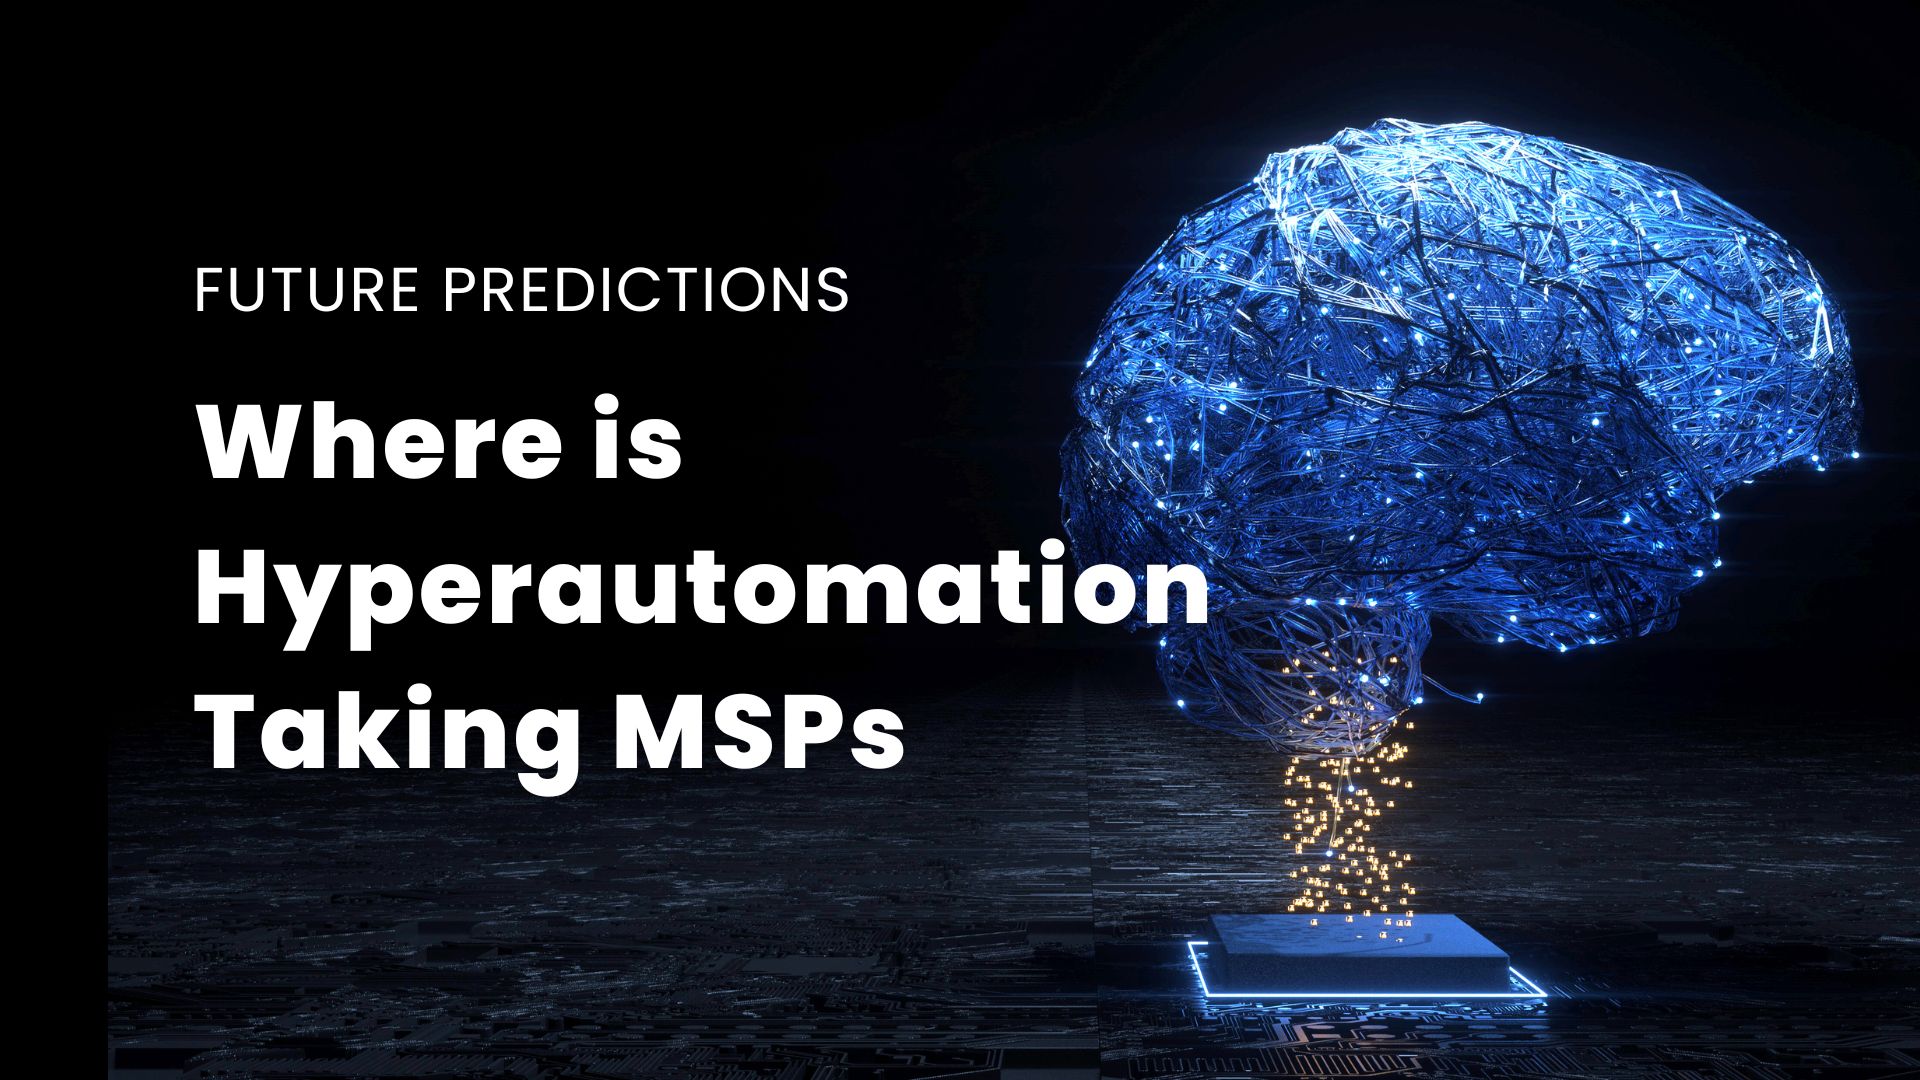 Future Predictions: Where is Hyperautomation Taking MSPs